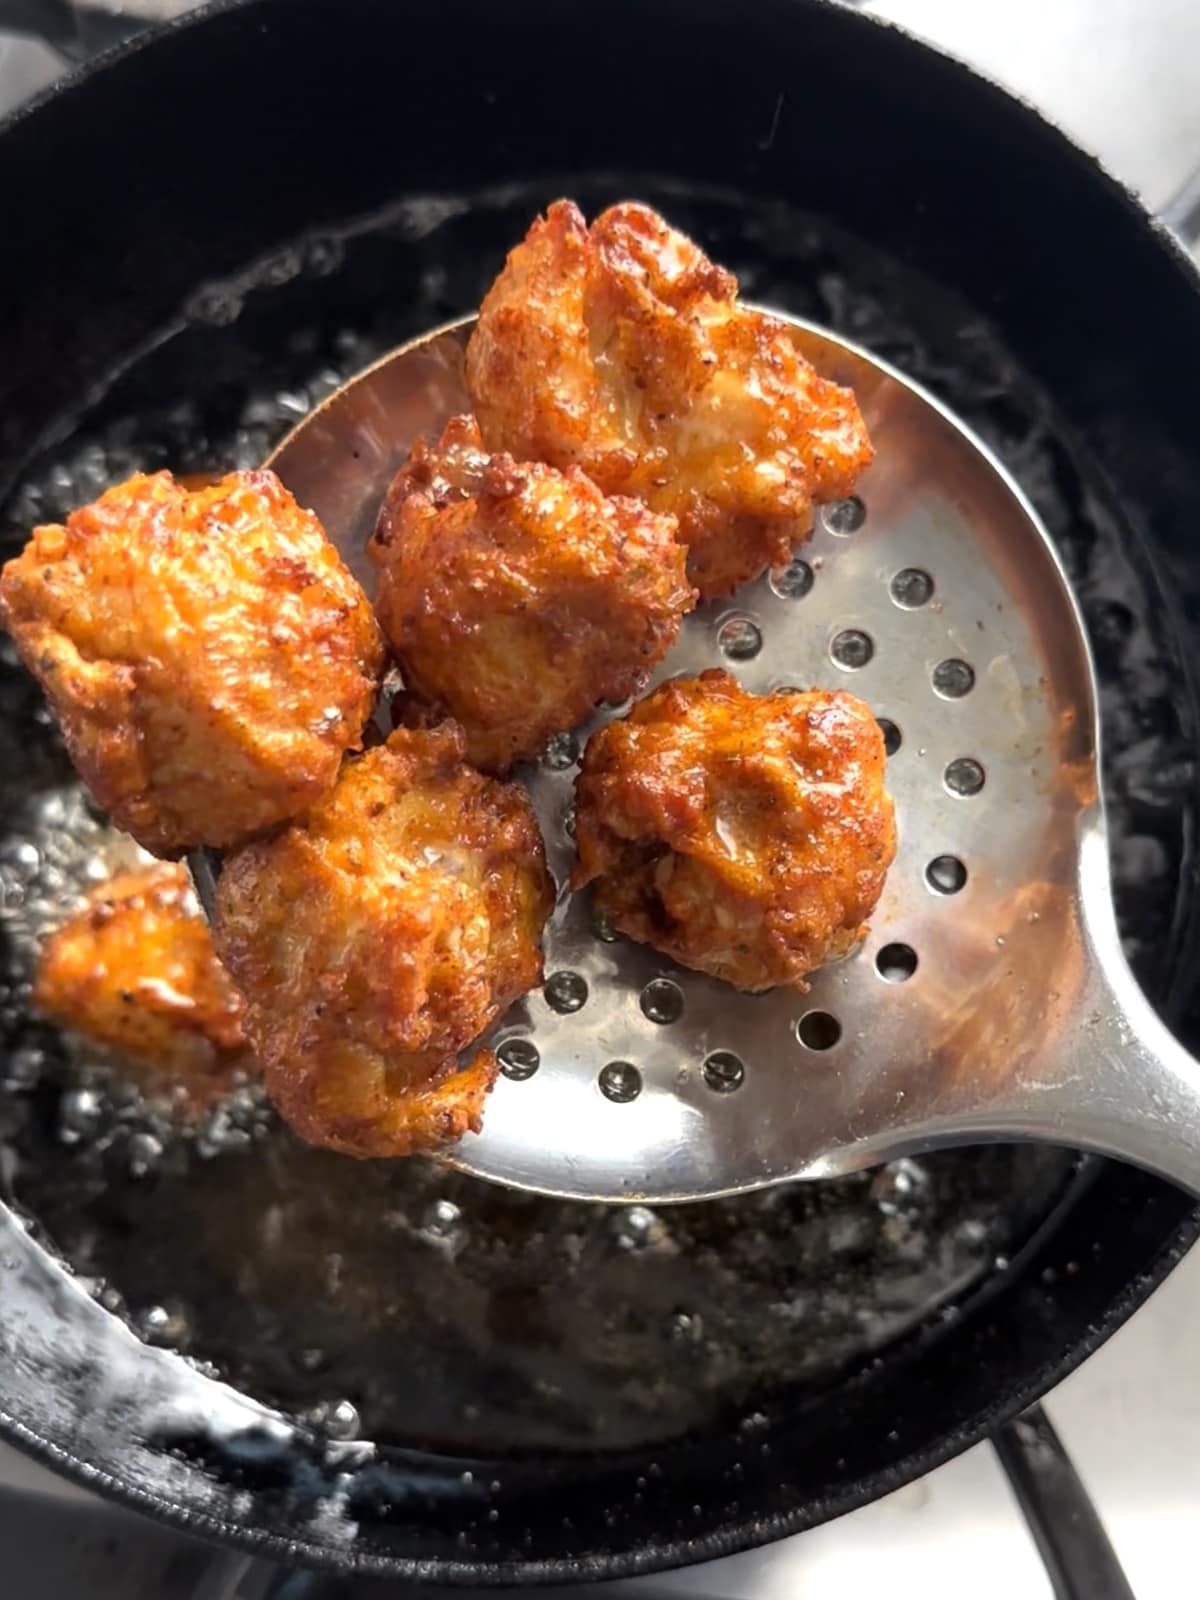 Fried Chicken 65 in a ladle